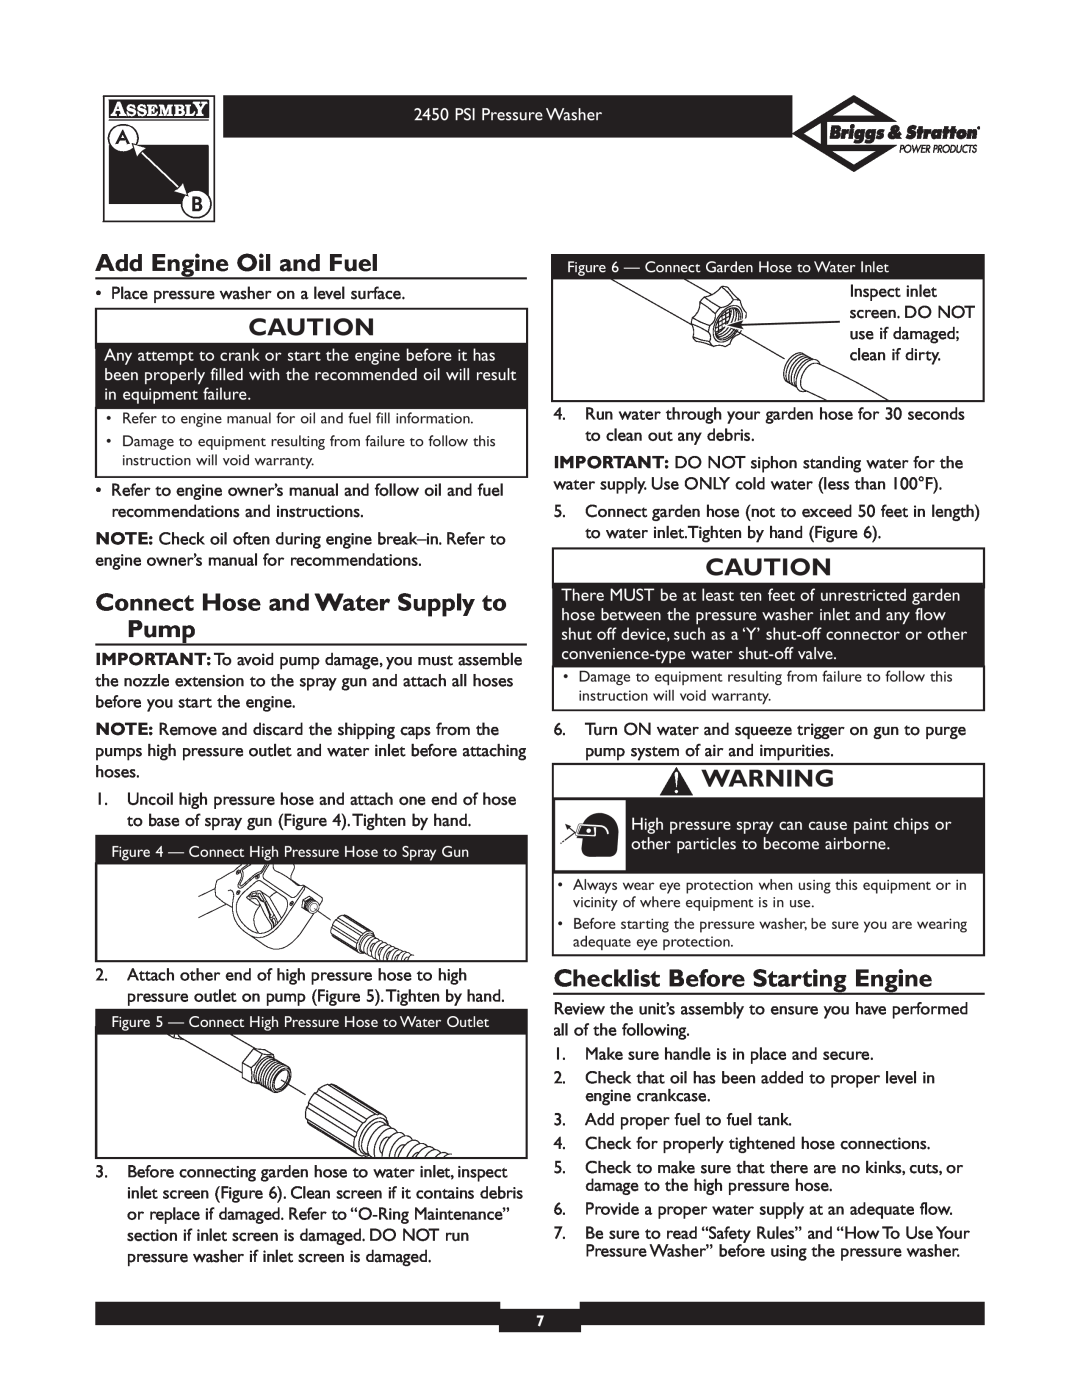 Briggs & Stratton 020219 Add Engine Oil and Fuel, Connect Hose and Water Supply to Pump, Checklist Before Starting Engine 